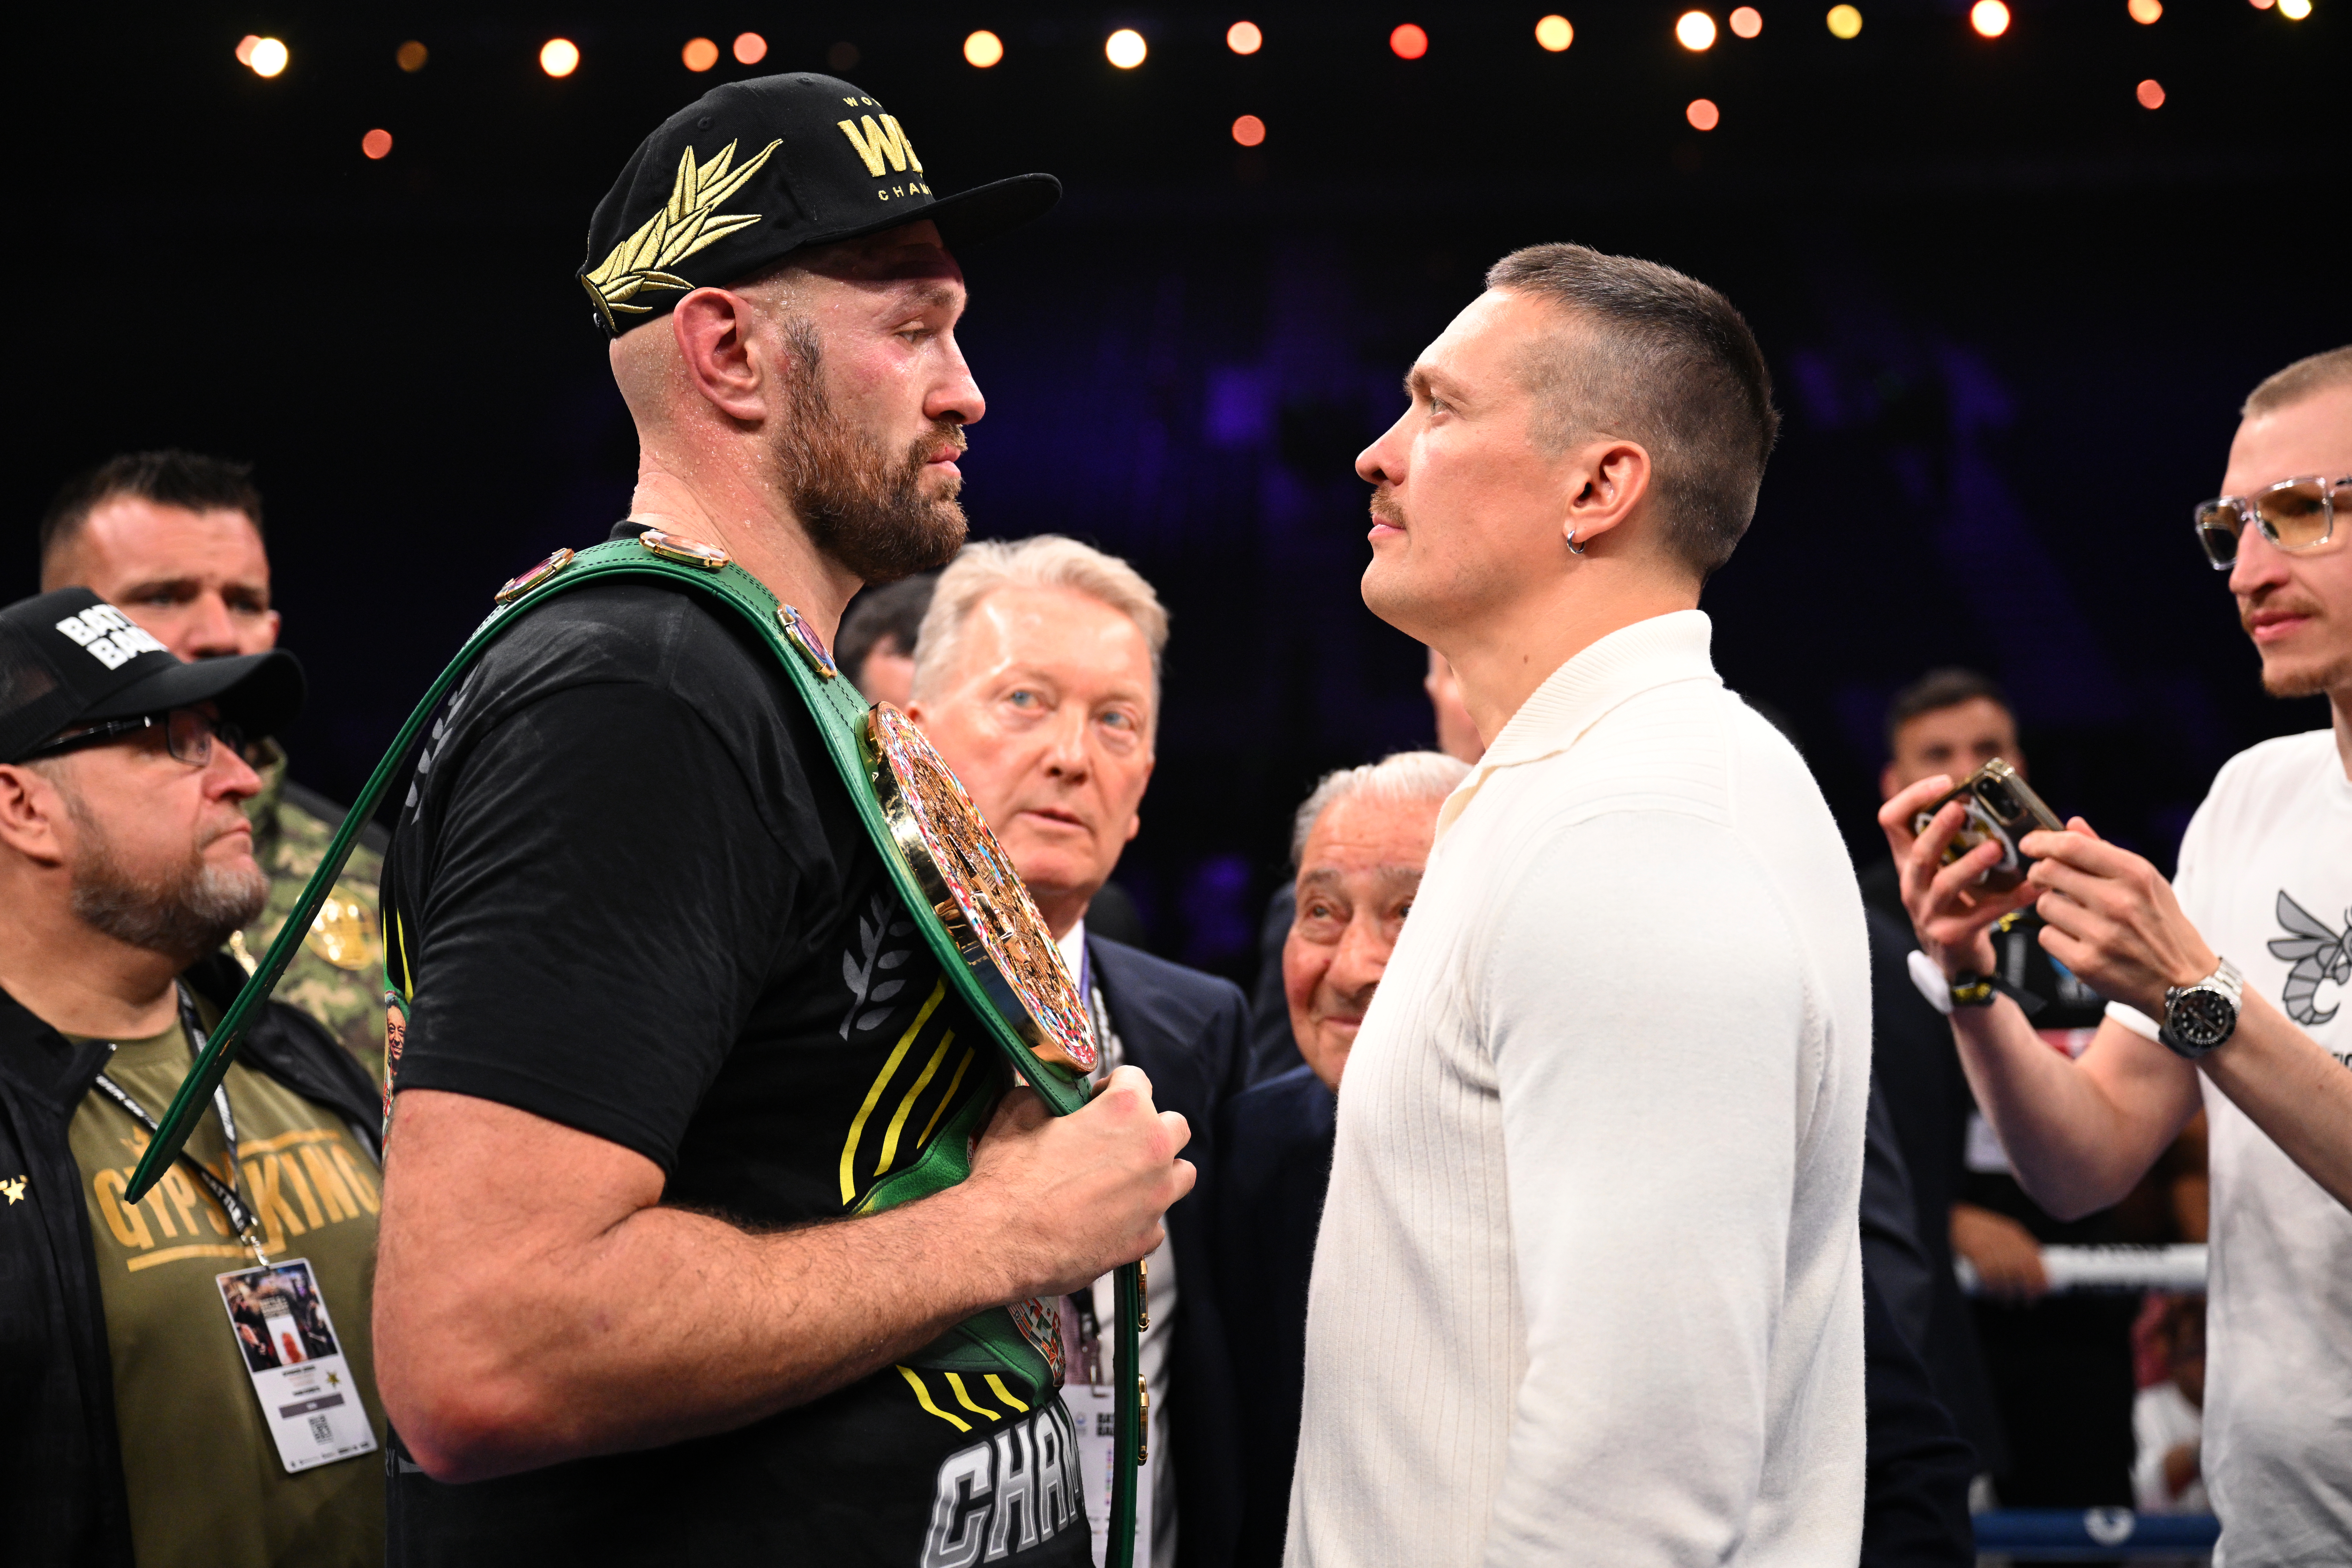 Tyson Fury and Oleksandr Usyk are set to fight on May 18